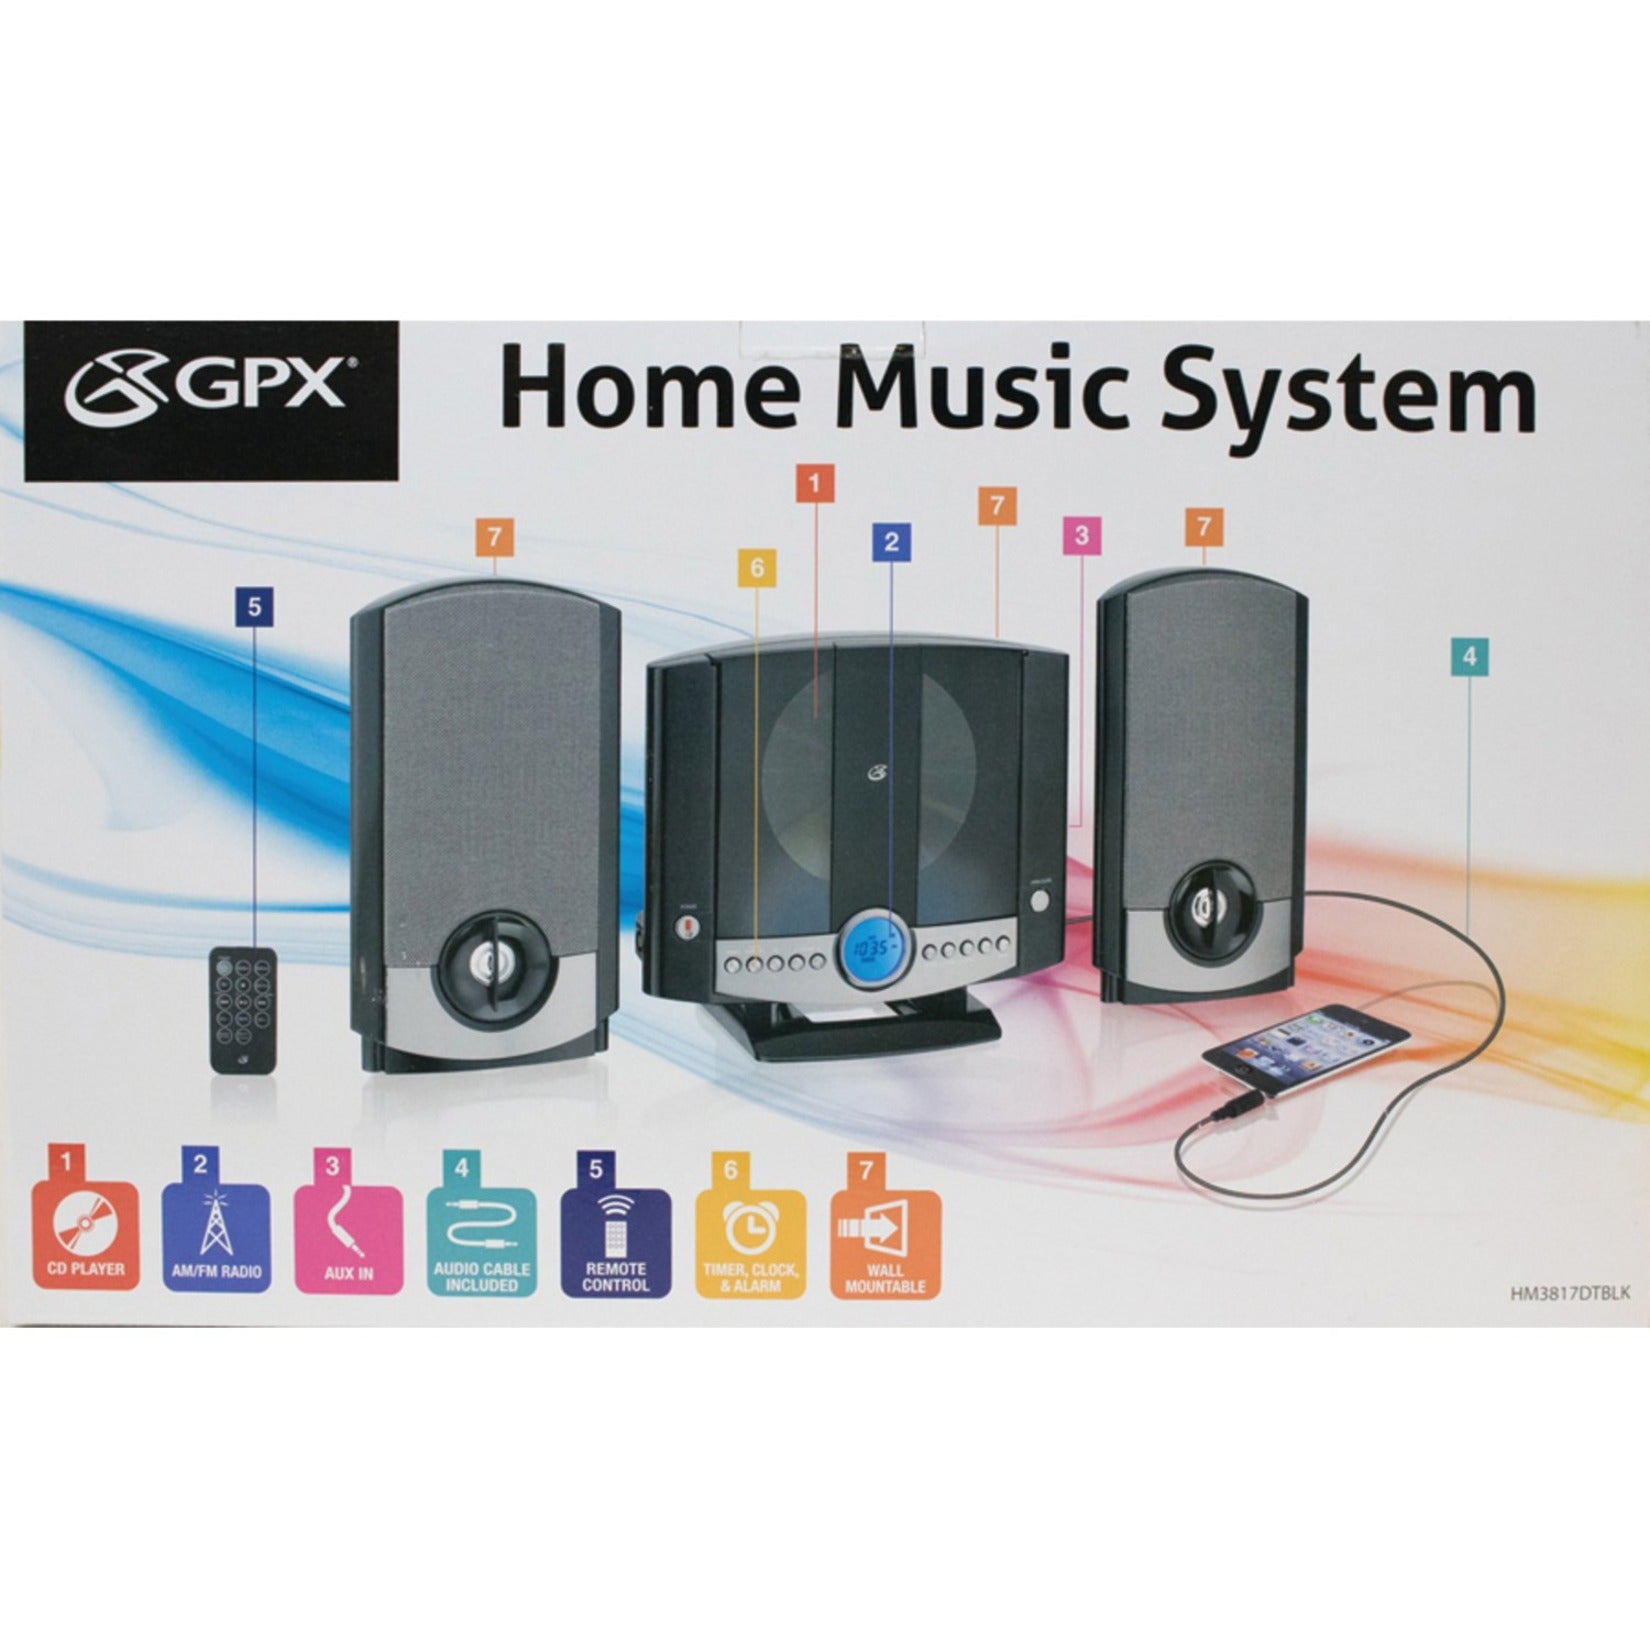 GPX HM3817DT Micro Hi-Fi System CD Player (HM3817DTBLK), LCD Display, FM/AM Frequency Band, 20 Tracks